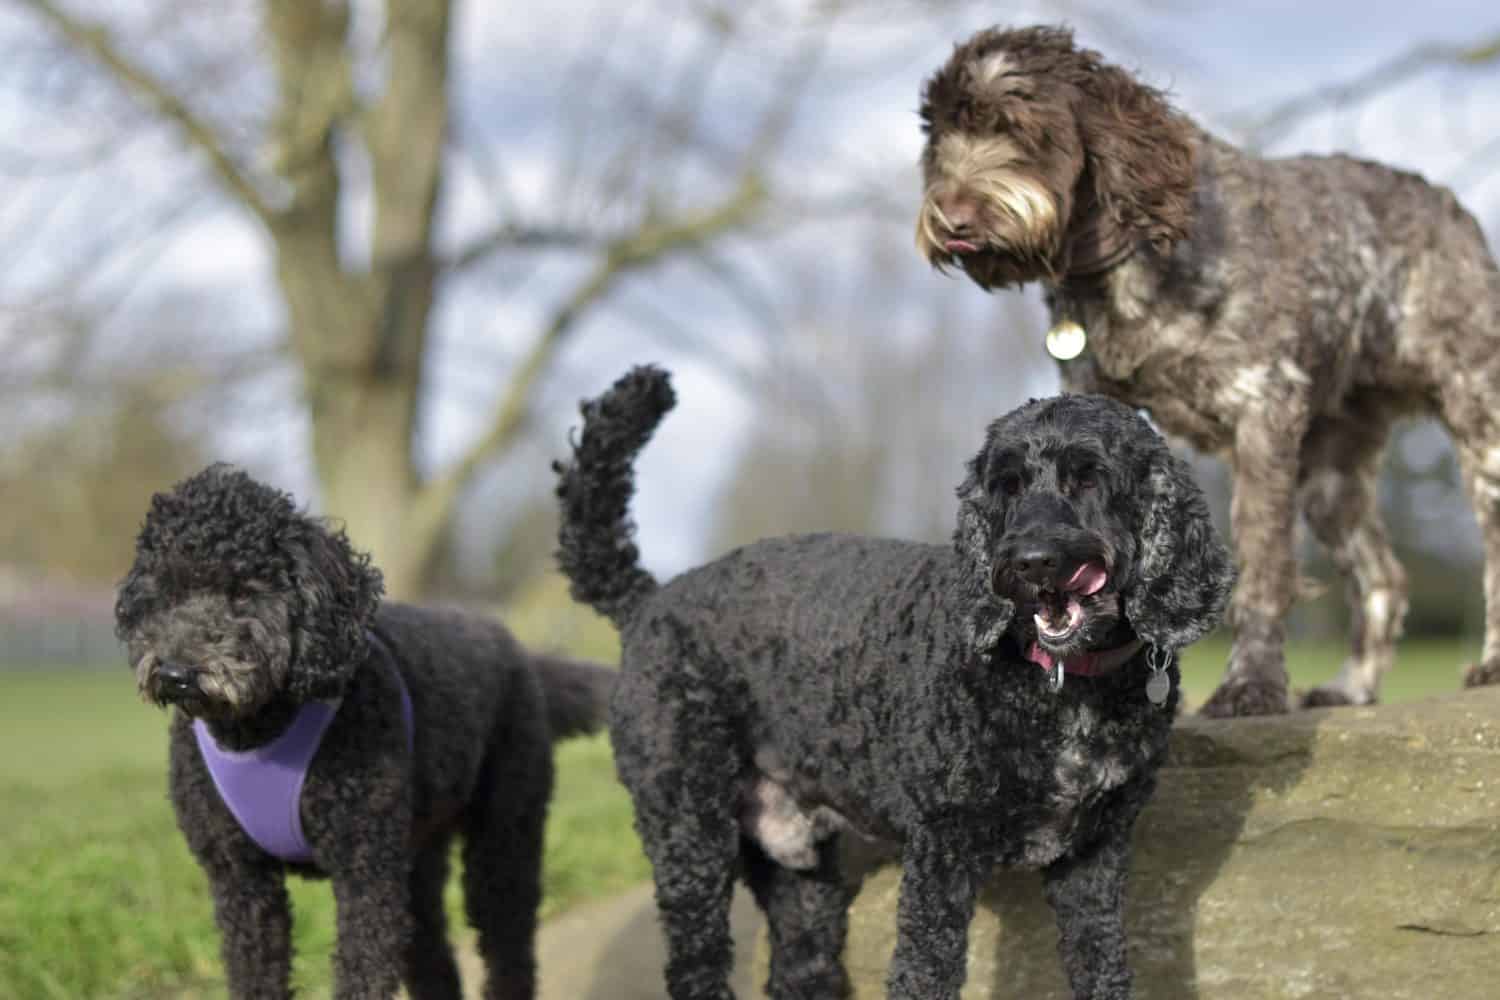 A group of poodle mix dogs are hanging out together, socializing and waiting for their food reward - Dog walking, socializing, pet sitting